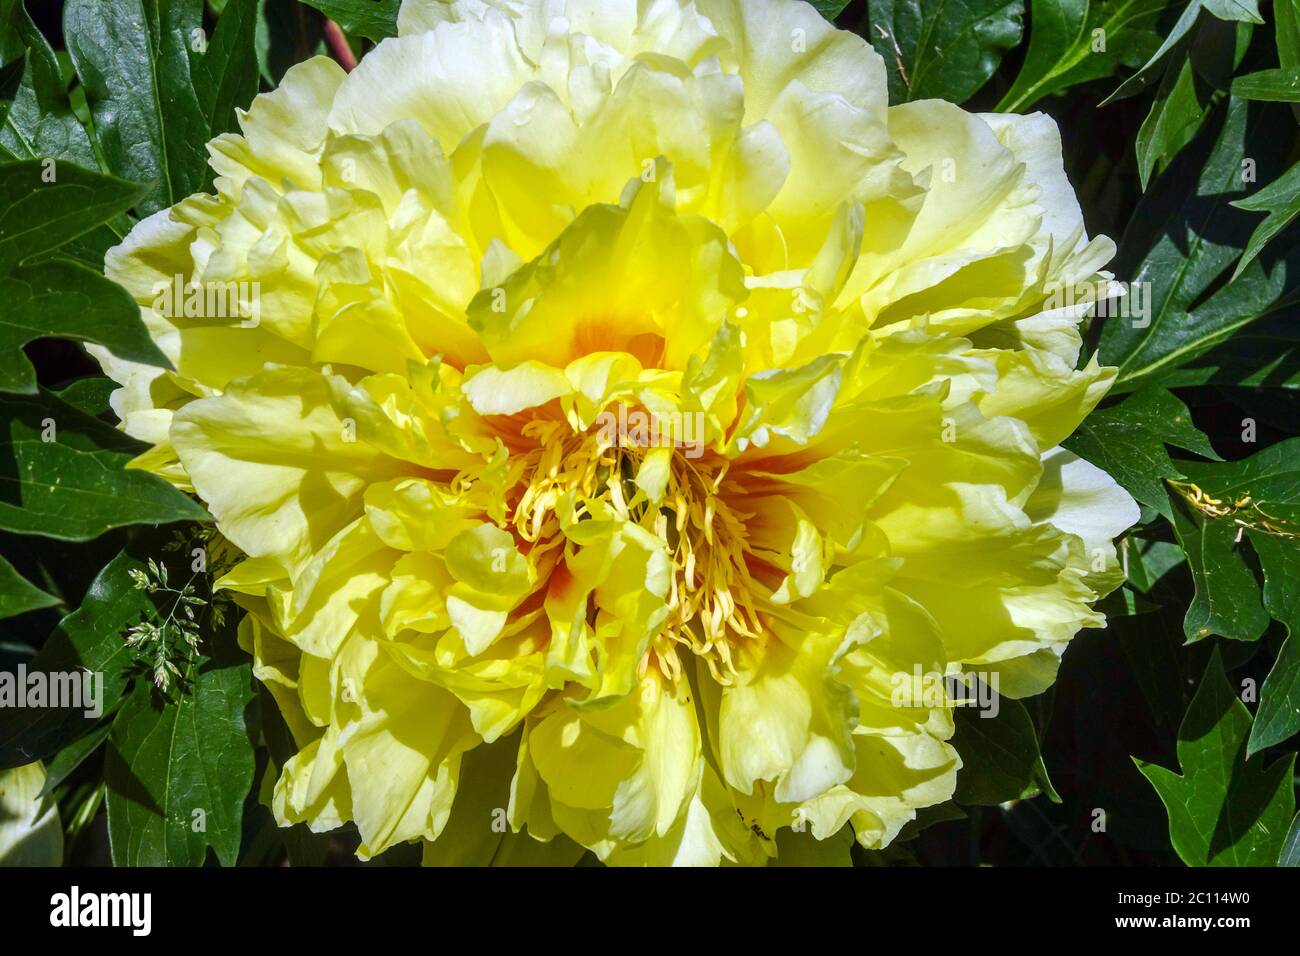 Yellow Peony 'Golden Dream' Flower Petals Peony Beautiful Blossoms Blooming Flowers Flowering June Flower In Bloom Peony Intersectional Stock Photo